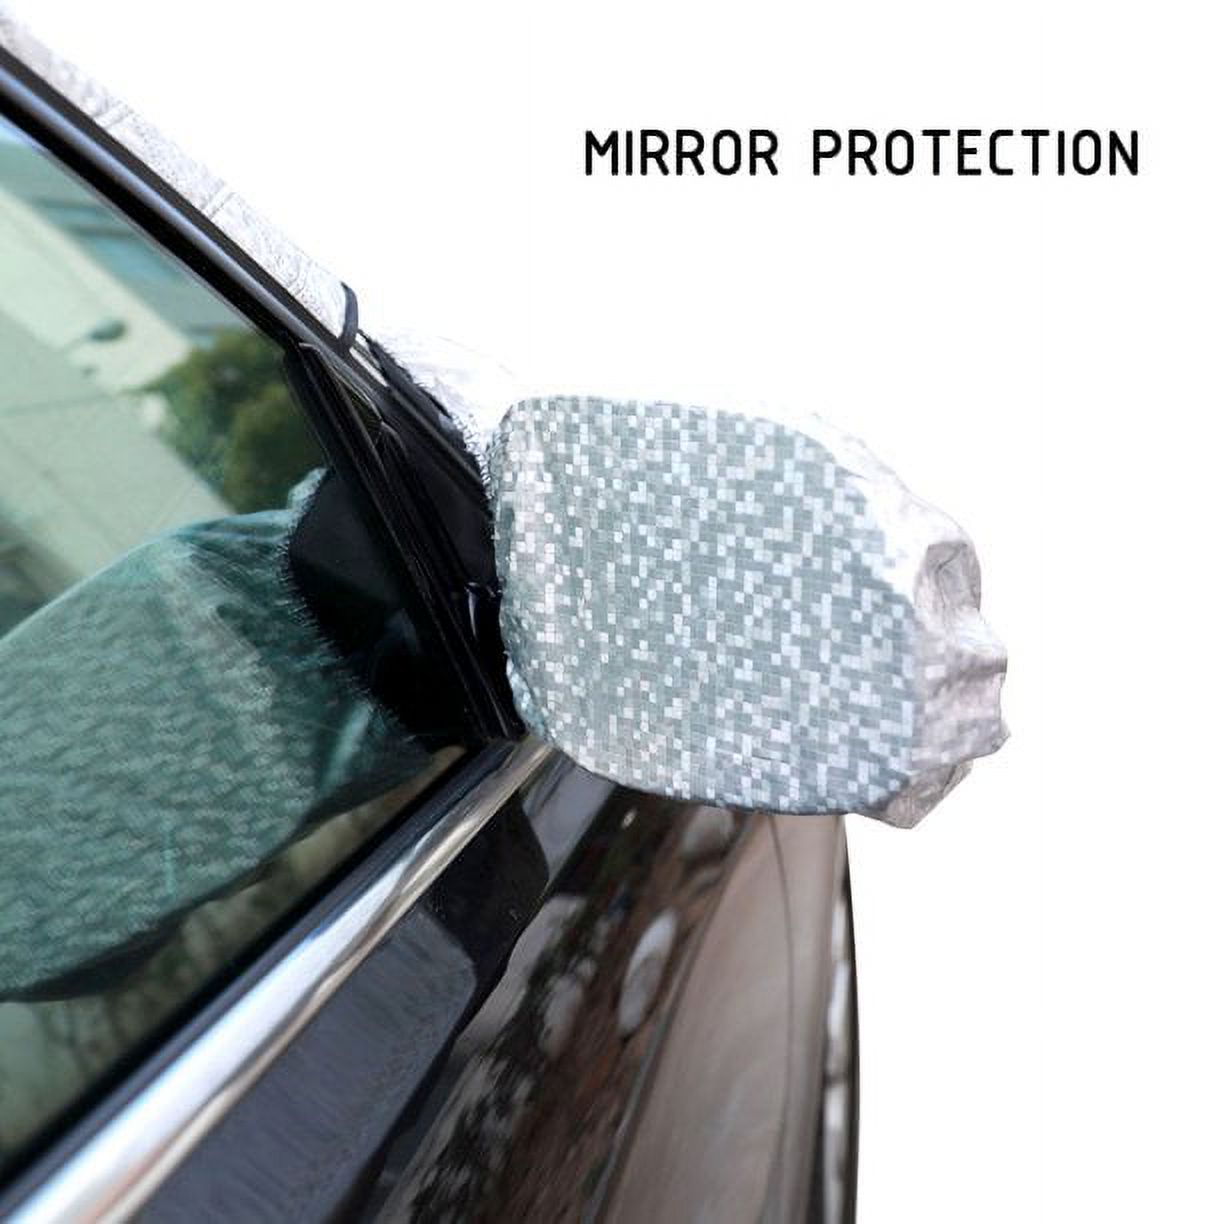 EASTIN Car Windshield Snow Cover, Car Windshield Cover for Snow, Ice, Sun, Frost Defense with 4 Layers Protection, Waterproof Windshield Cover Fits for Most Standard Cars & CRVs - image 2 of 6